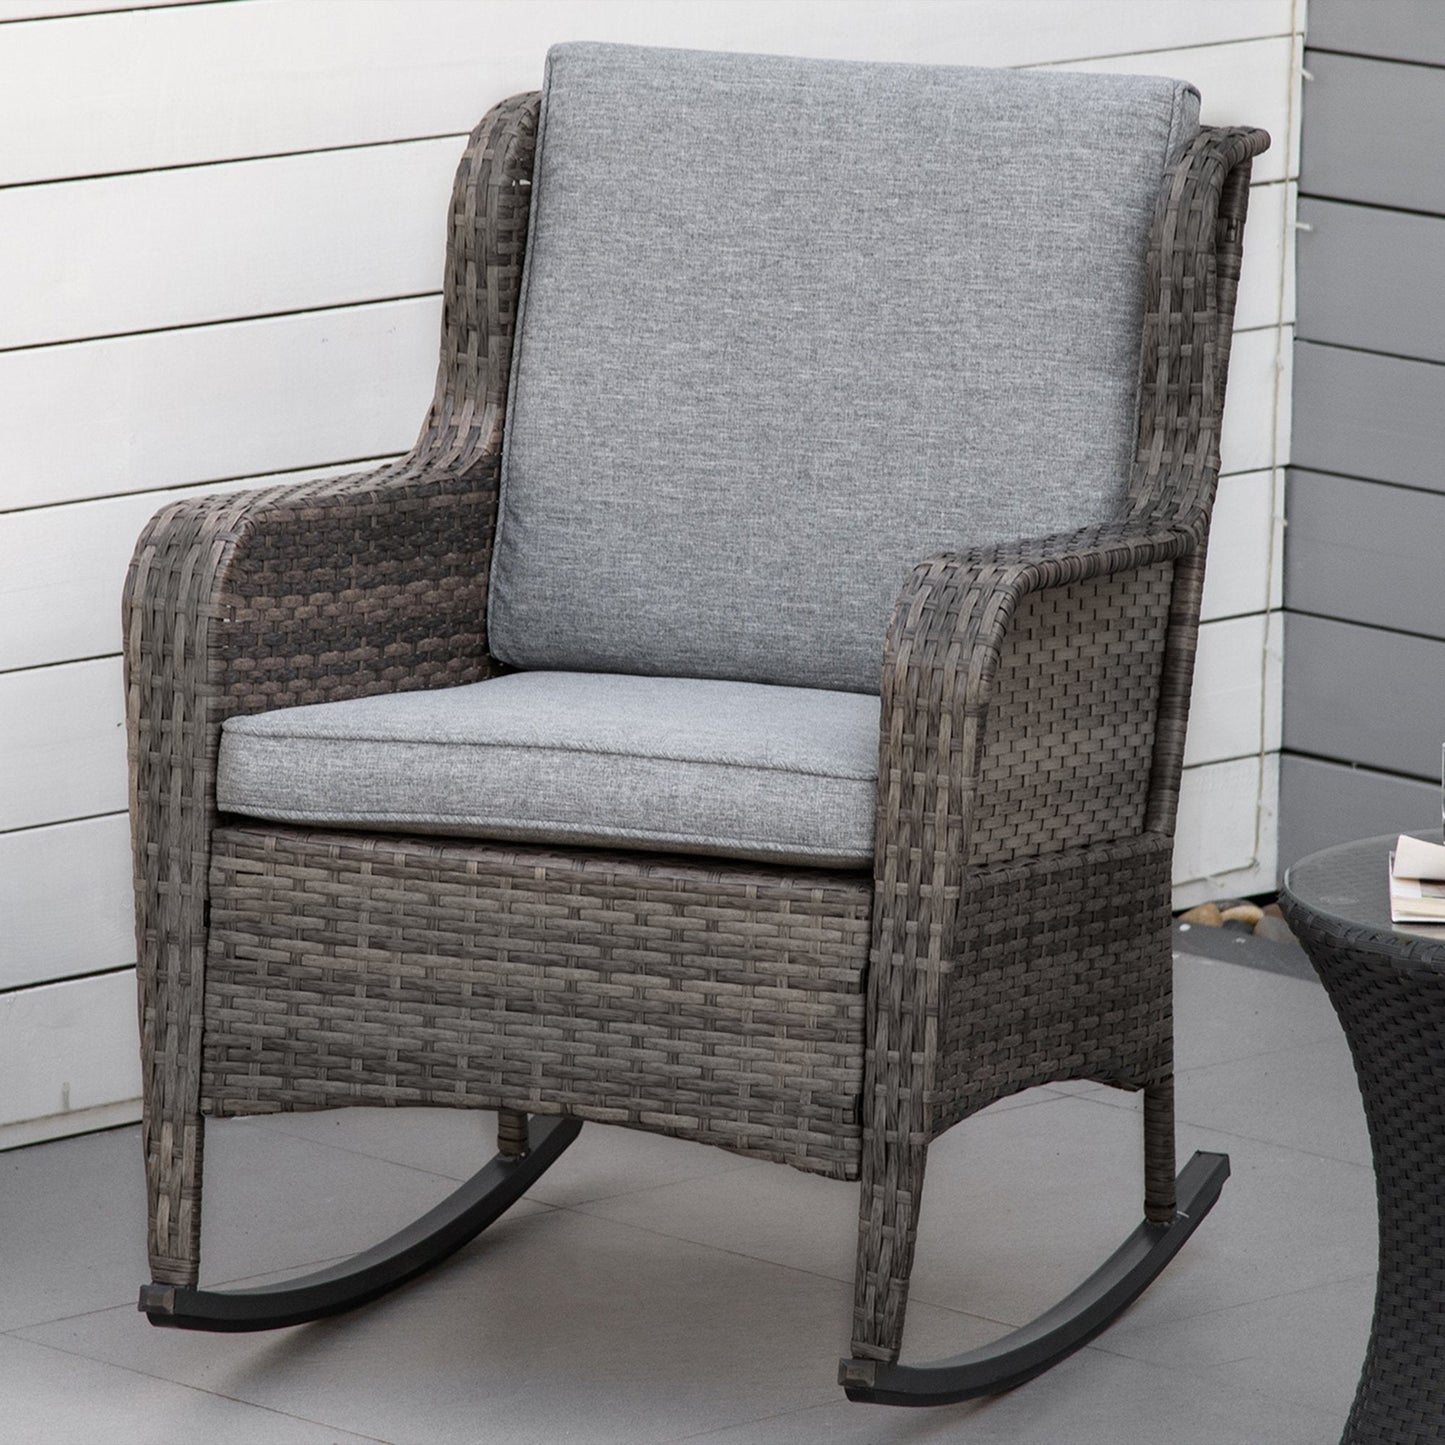 Outdoor and Garden-Patio Wicker Rocking Chair, Outdoor PE Rattan Swing Chair w/ Soft Cushions, Classic Style for Garden, Patio, Lawn, Mixed Grey - Outdoor Style Company